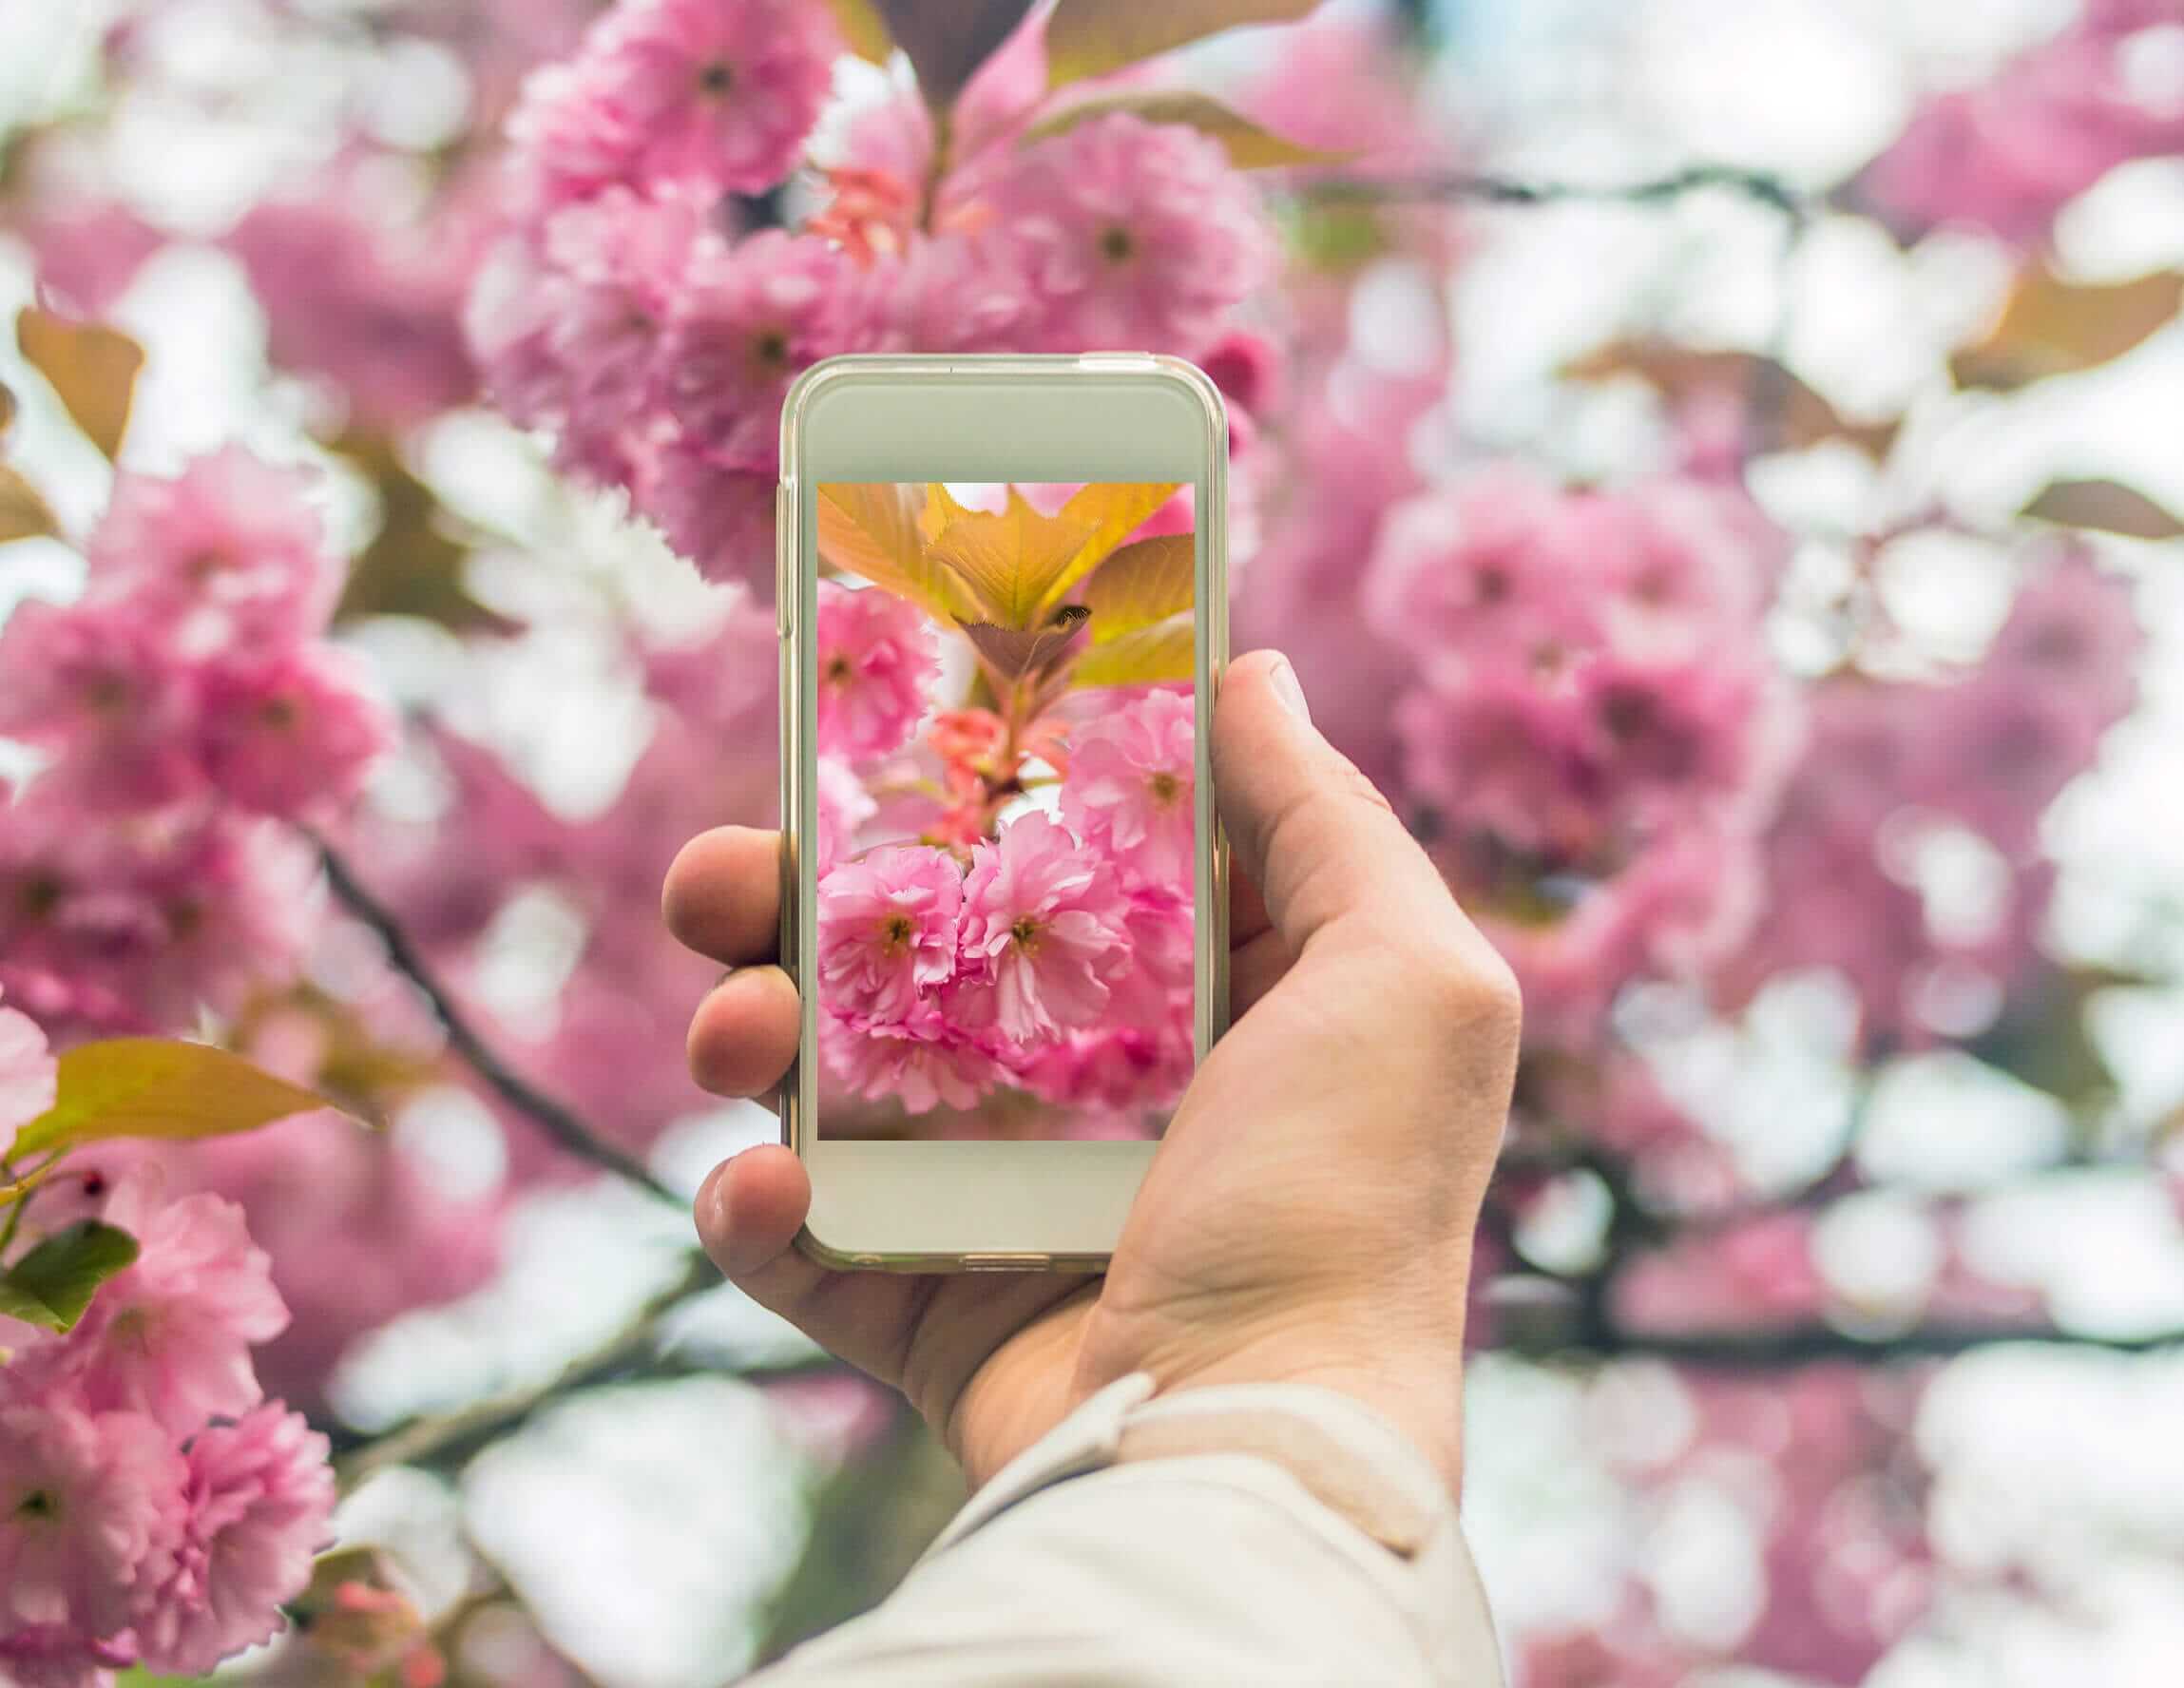 The 5 Best Mobile Photo Editing Apps for Photographers